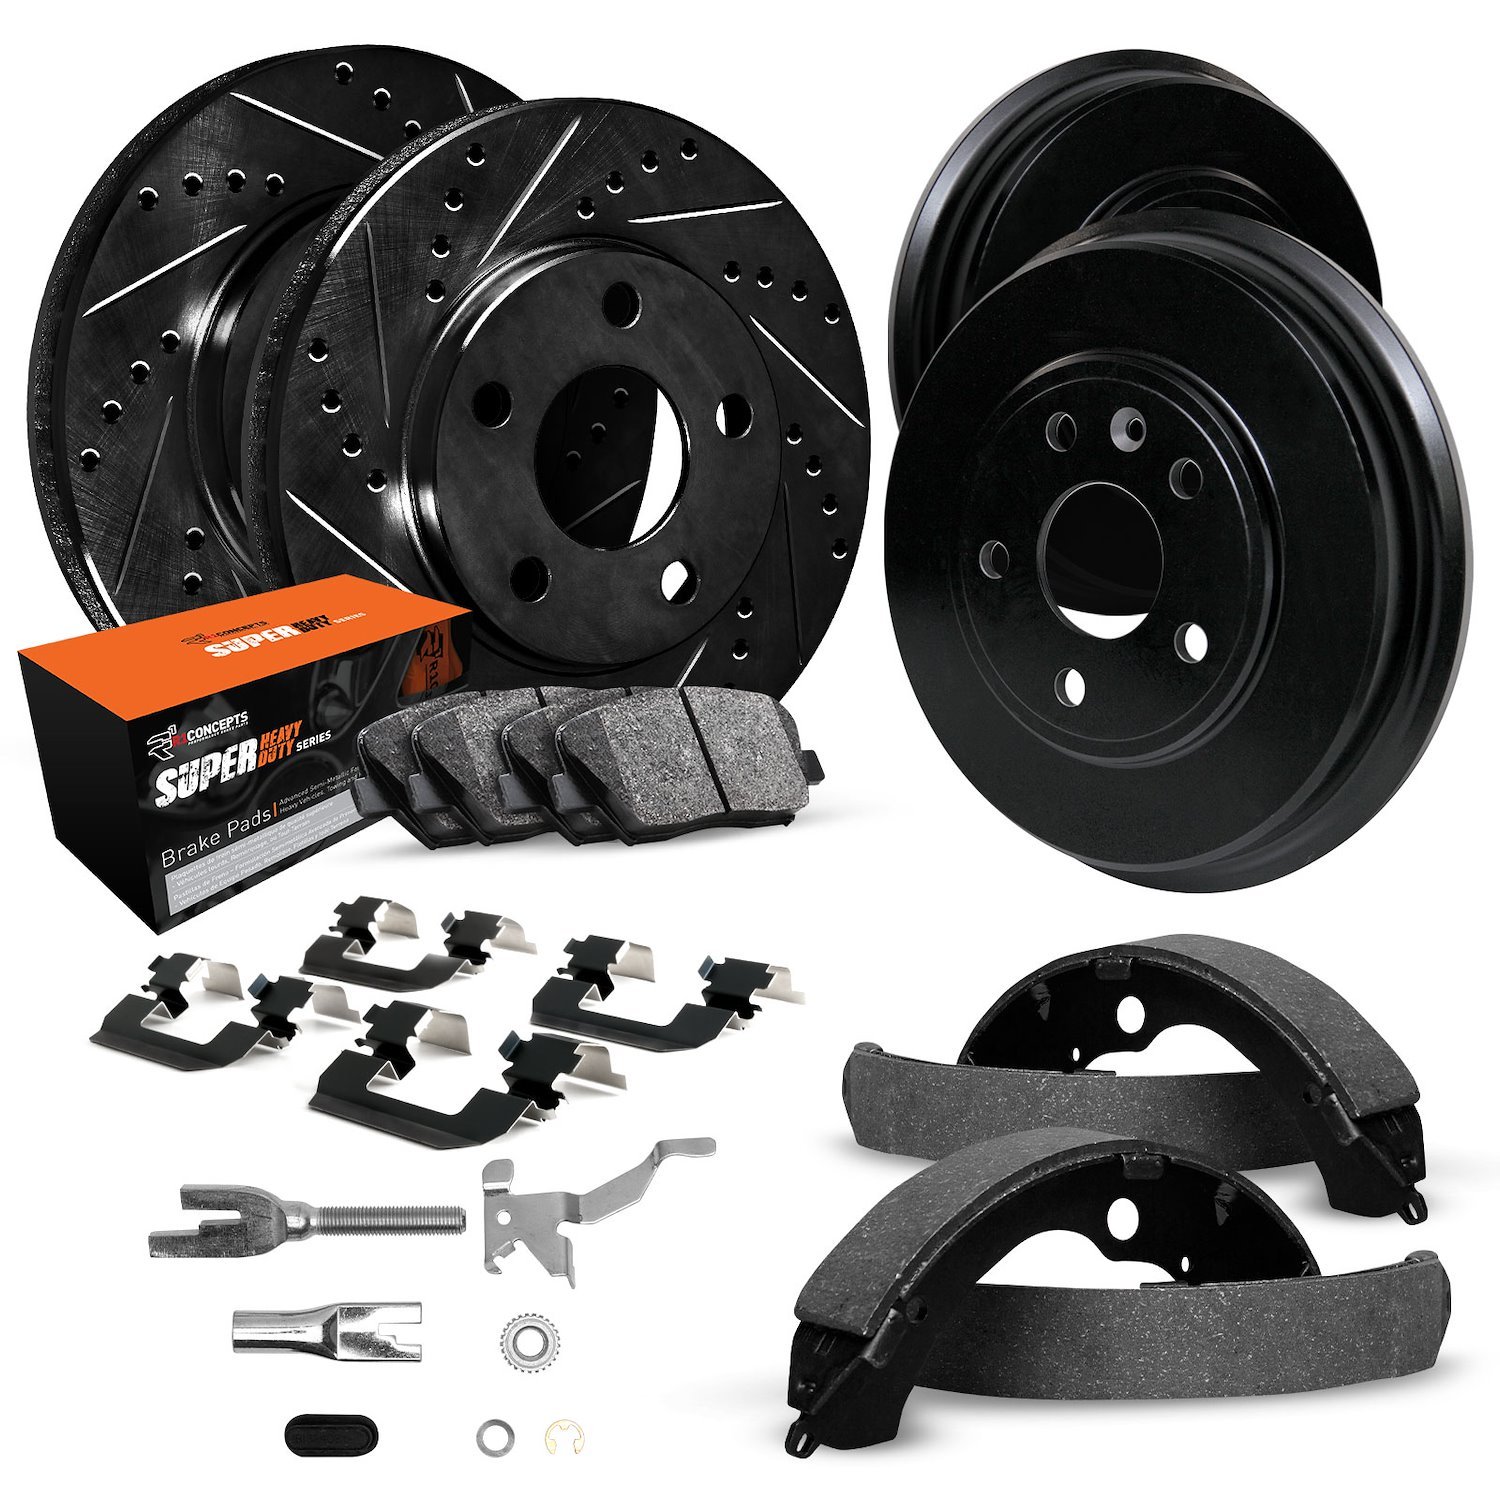 E-Line Drilled/Slotted Black Rotor & Drum Set w/Super-Duty Pads, Shoes, Hardware/Adjusters, 1991-1991 GM